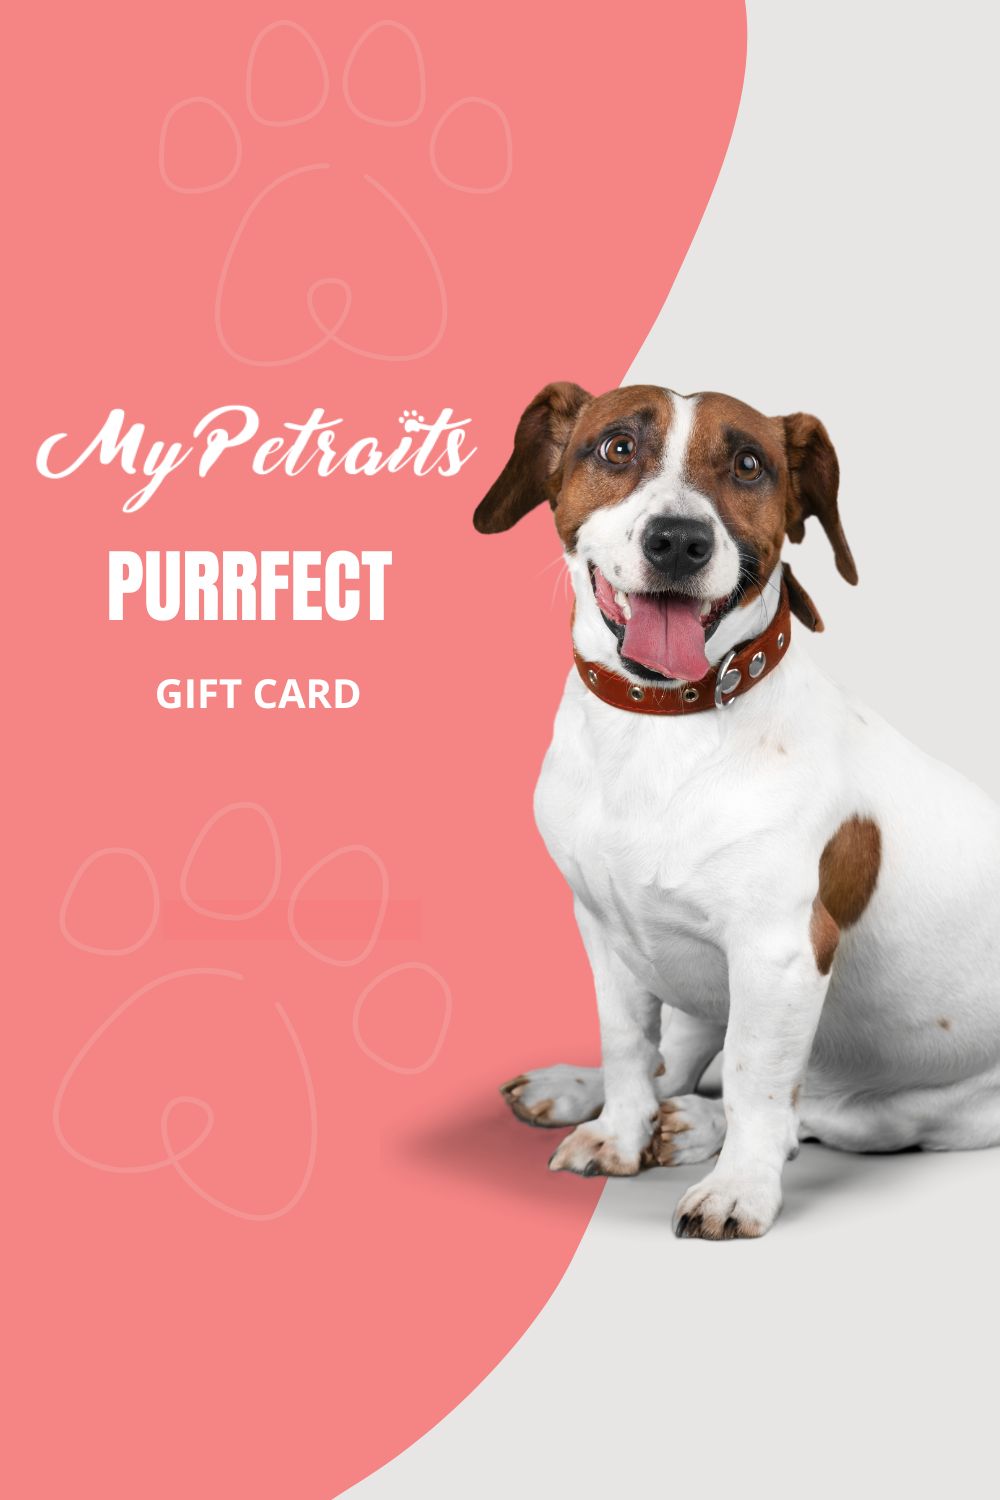 MyPetraits gift card for pet lovers